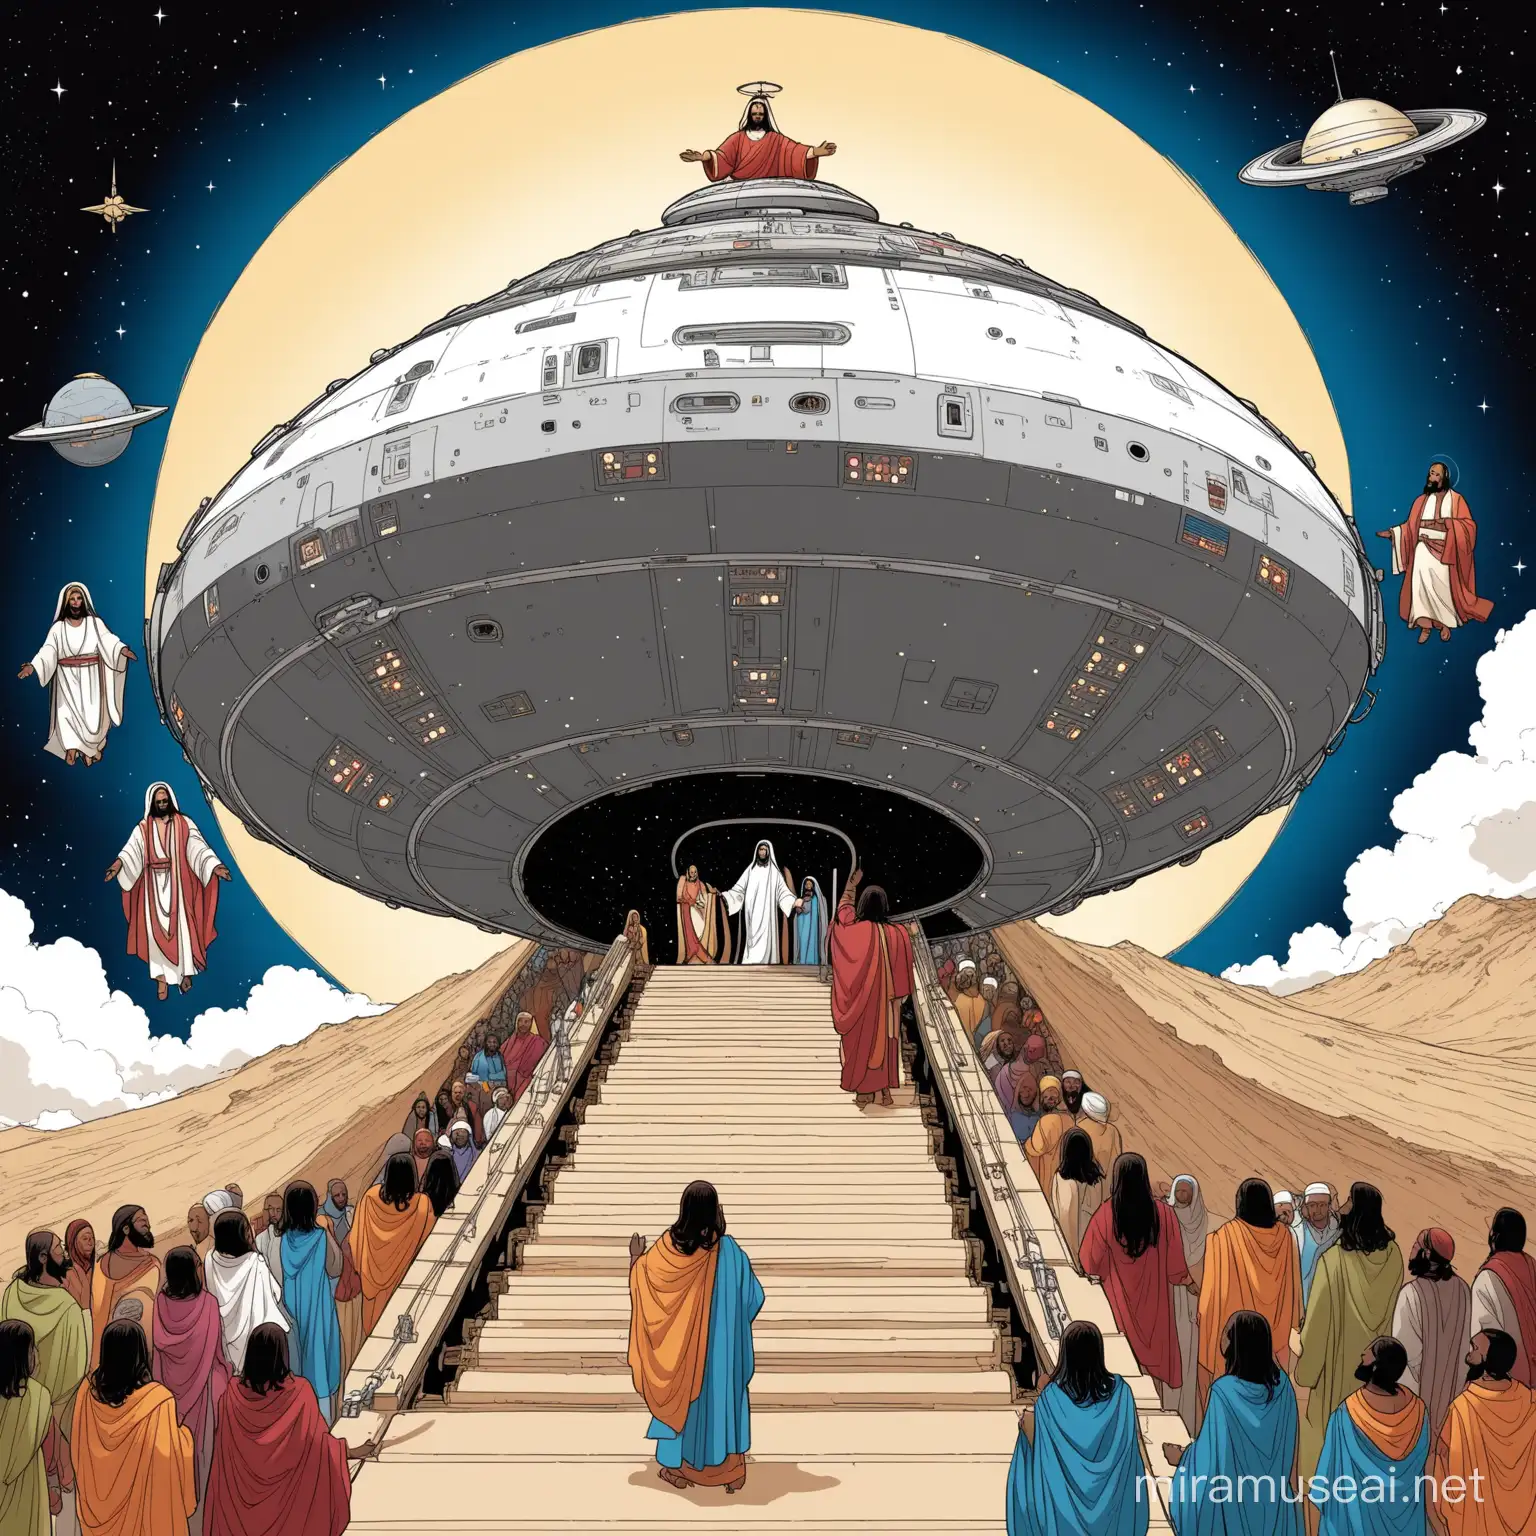 a large spacecraft having landed and several jesus christ figures of various races, ethnicities and cultures descending down a ramp